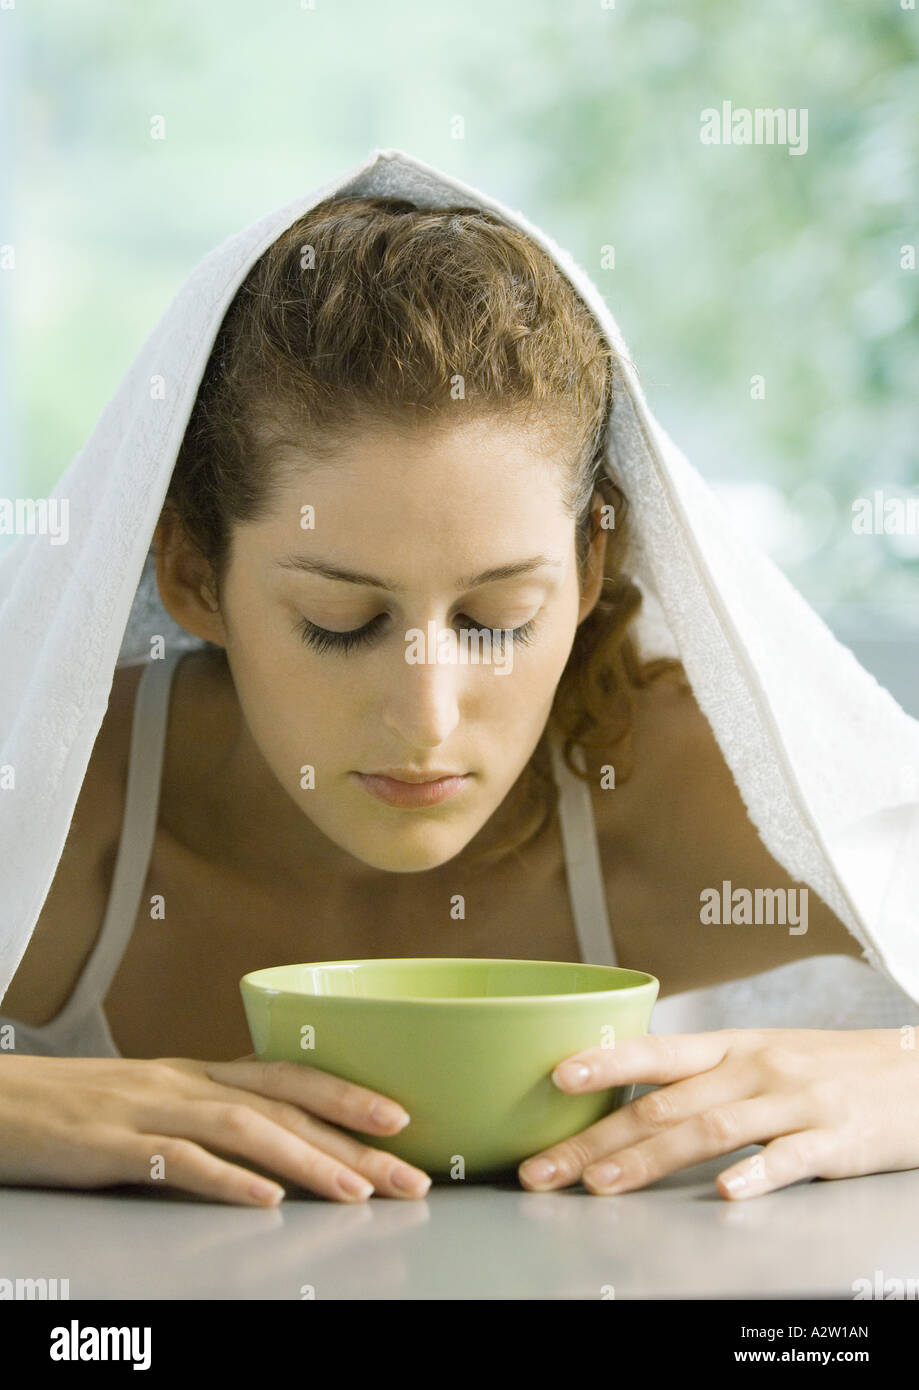 Woman with face over bowl and towel over head Stock Photo